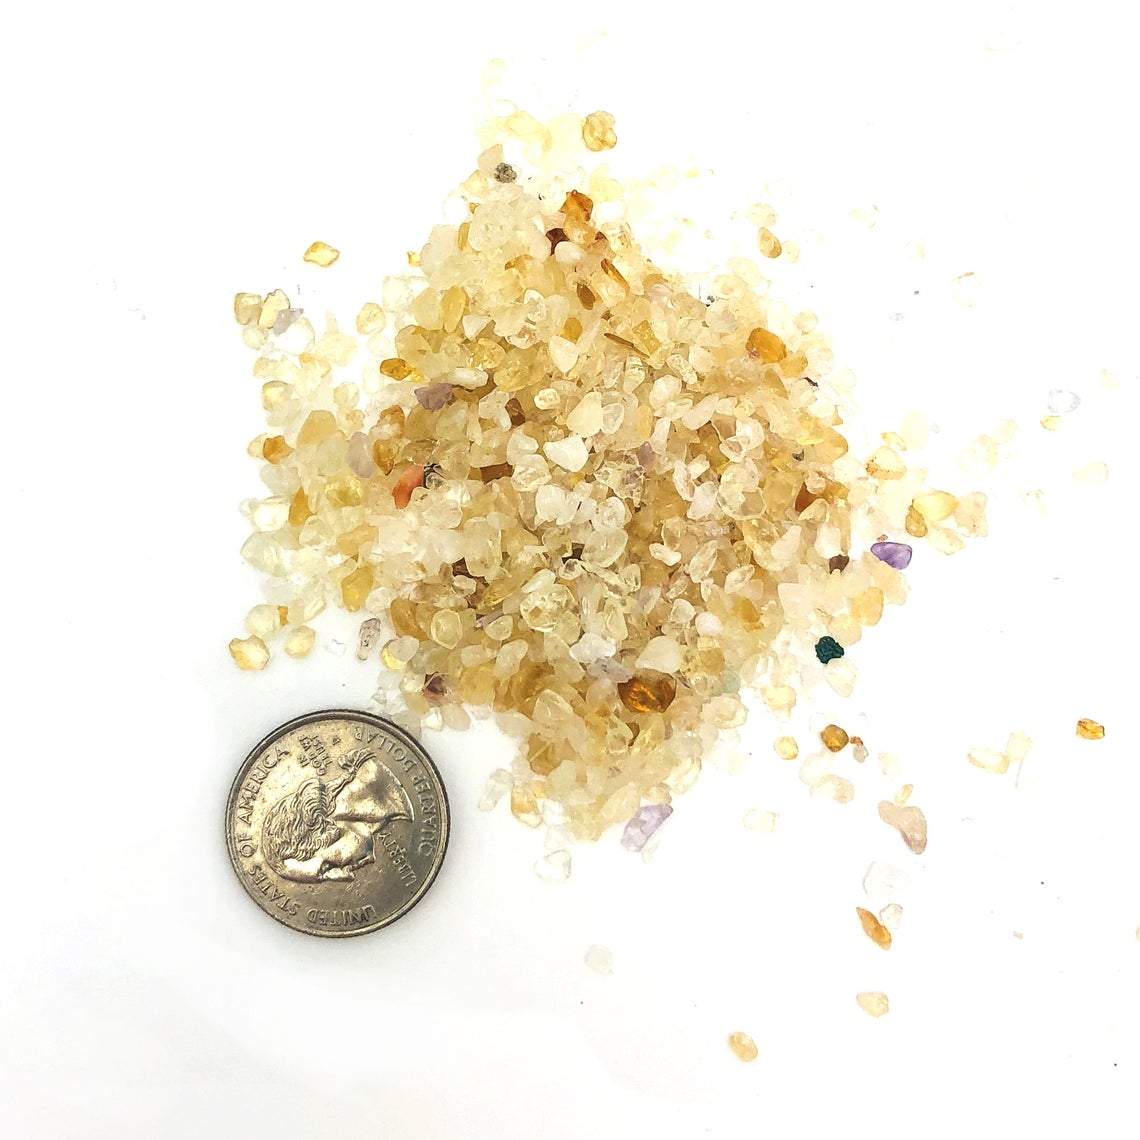 citrine chips next to a quarter for size reference 